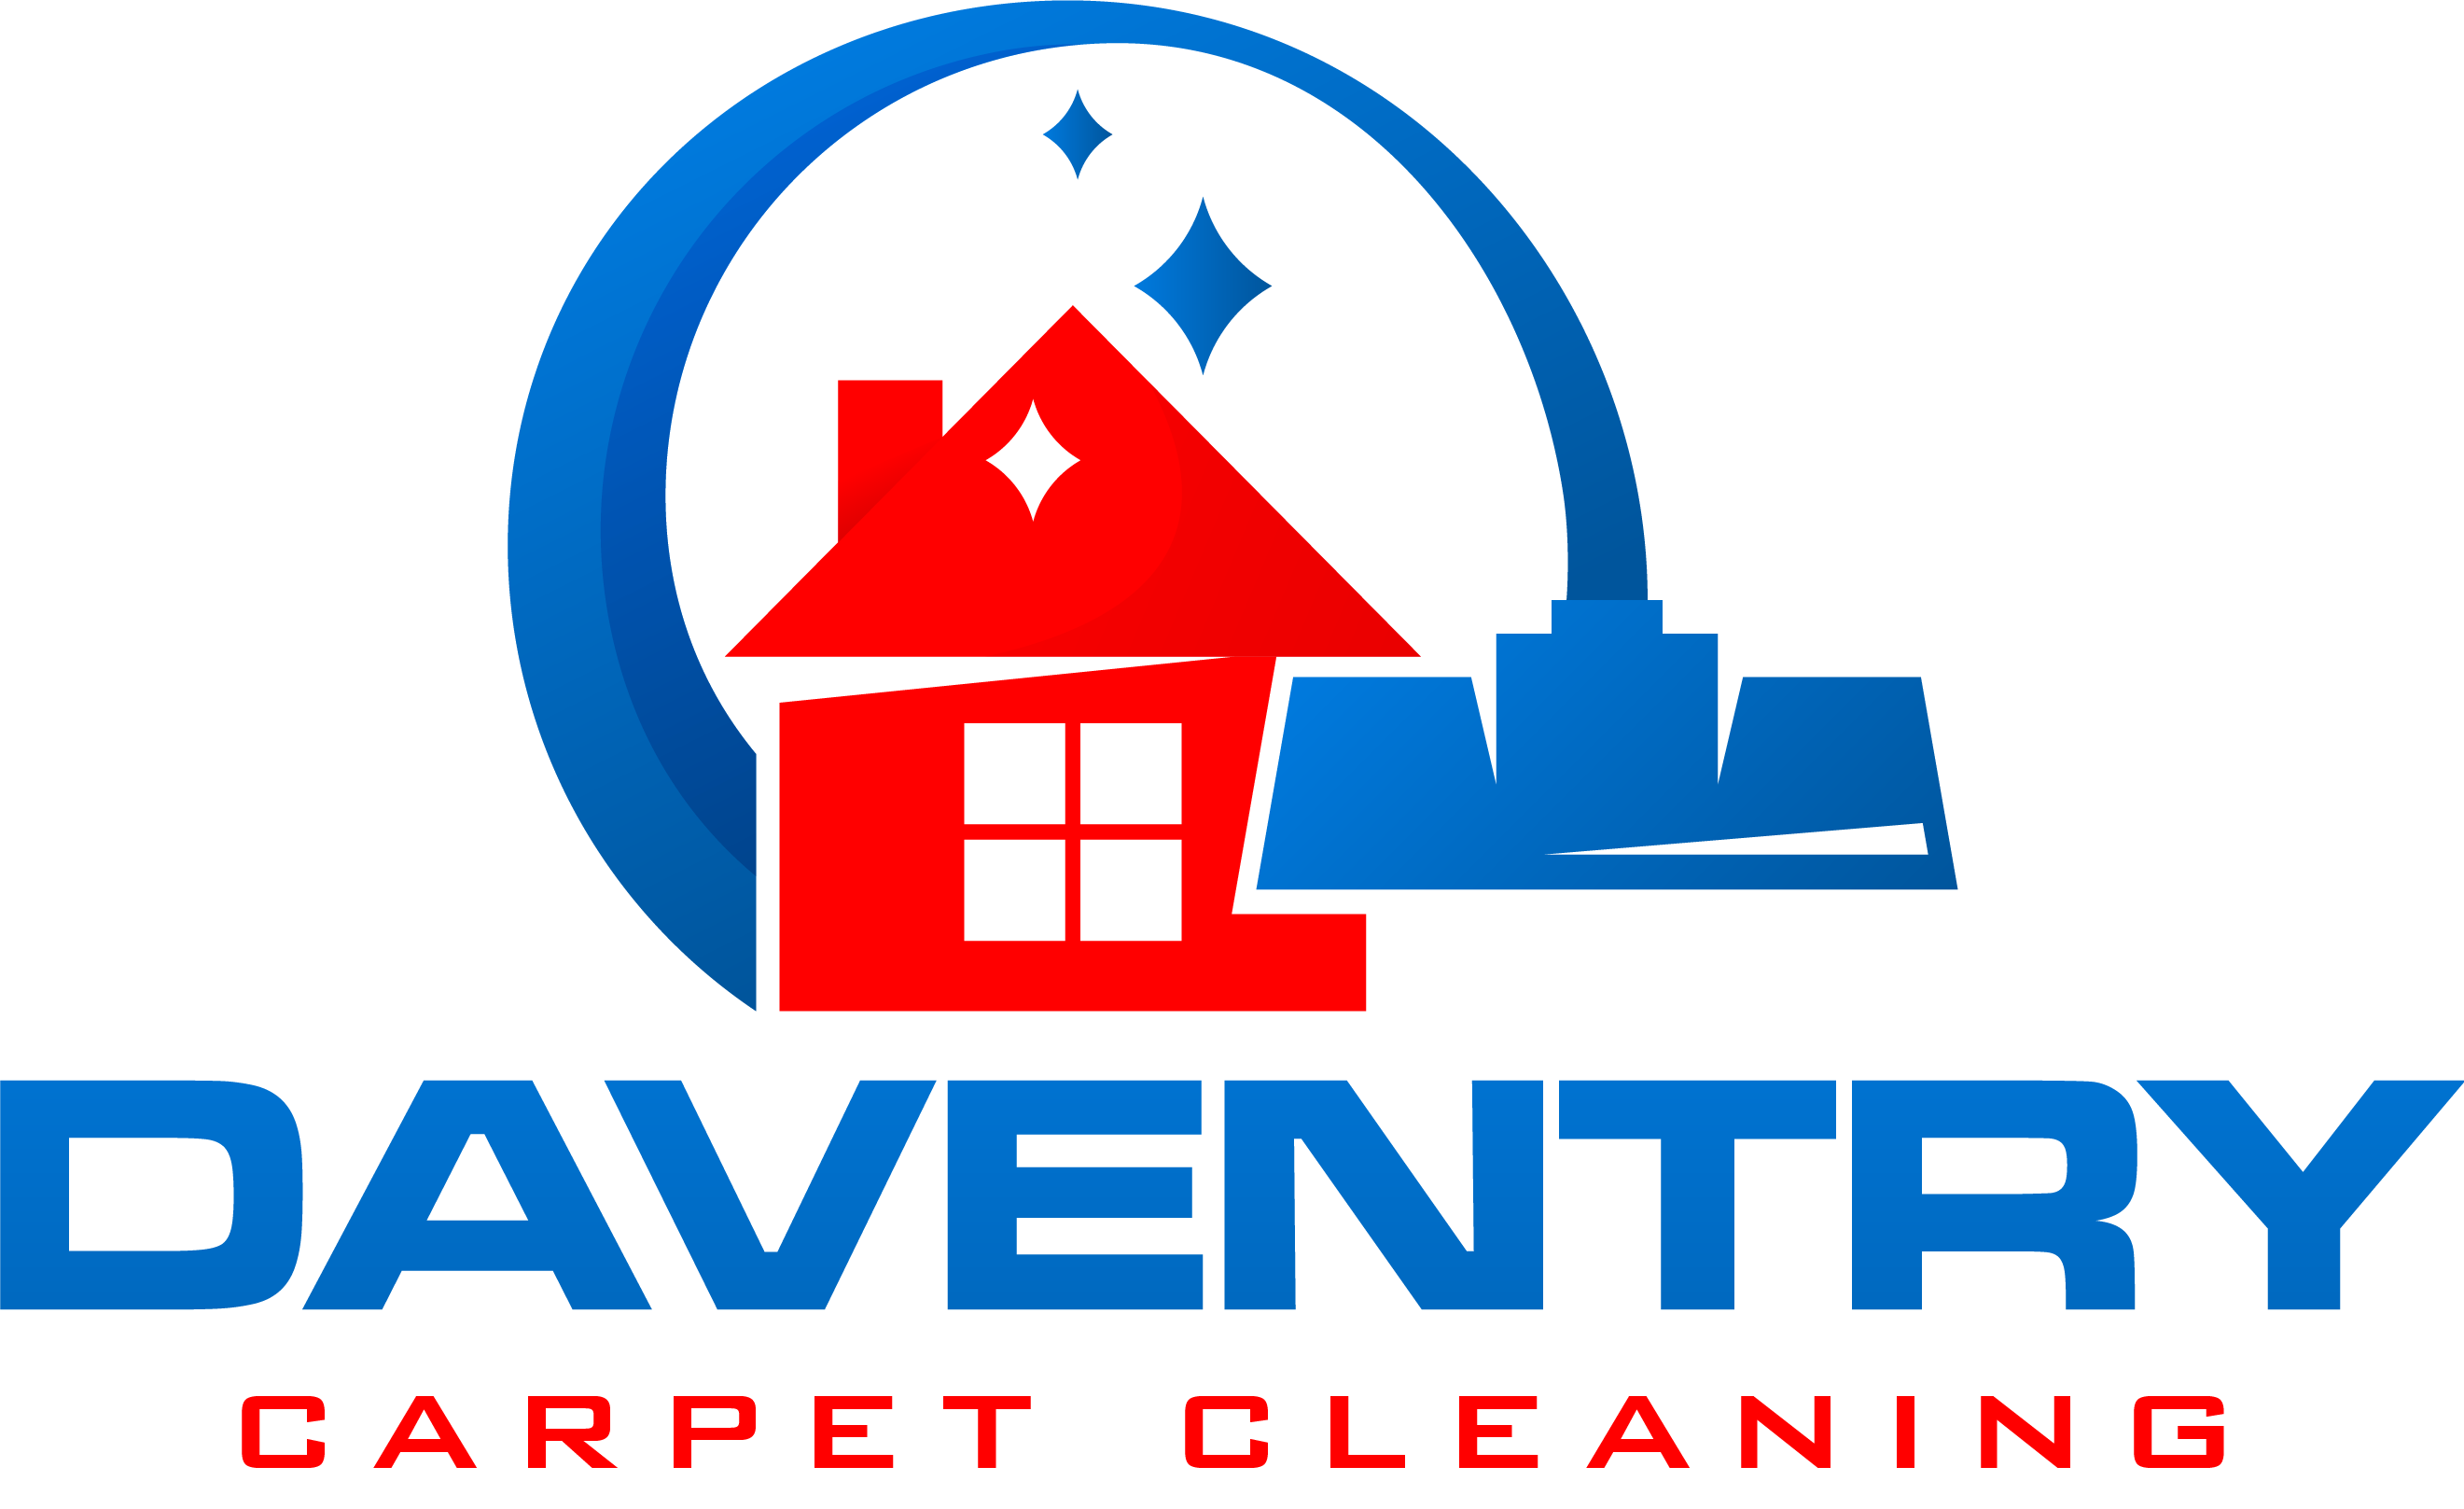 Daventry carpet cleaning site logo